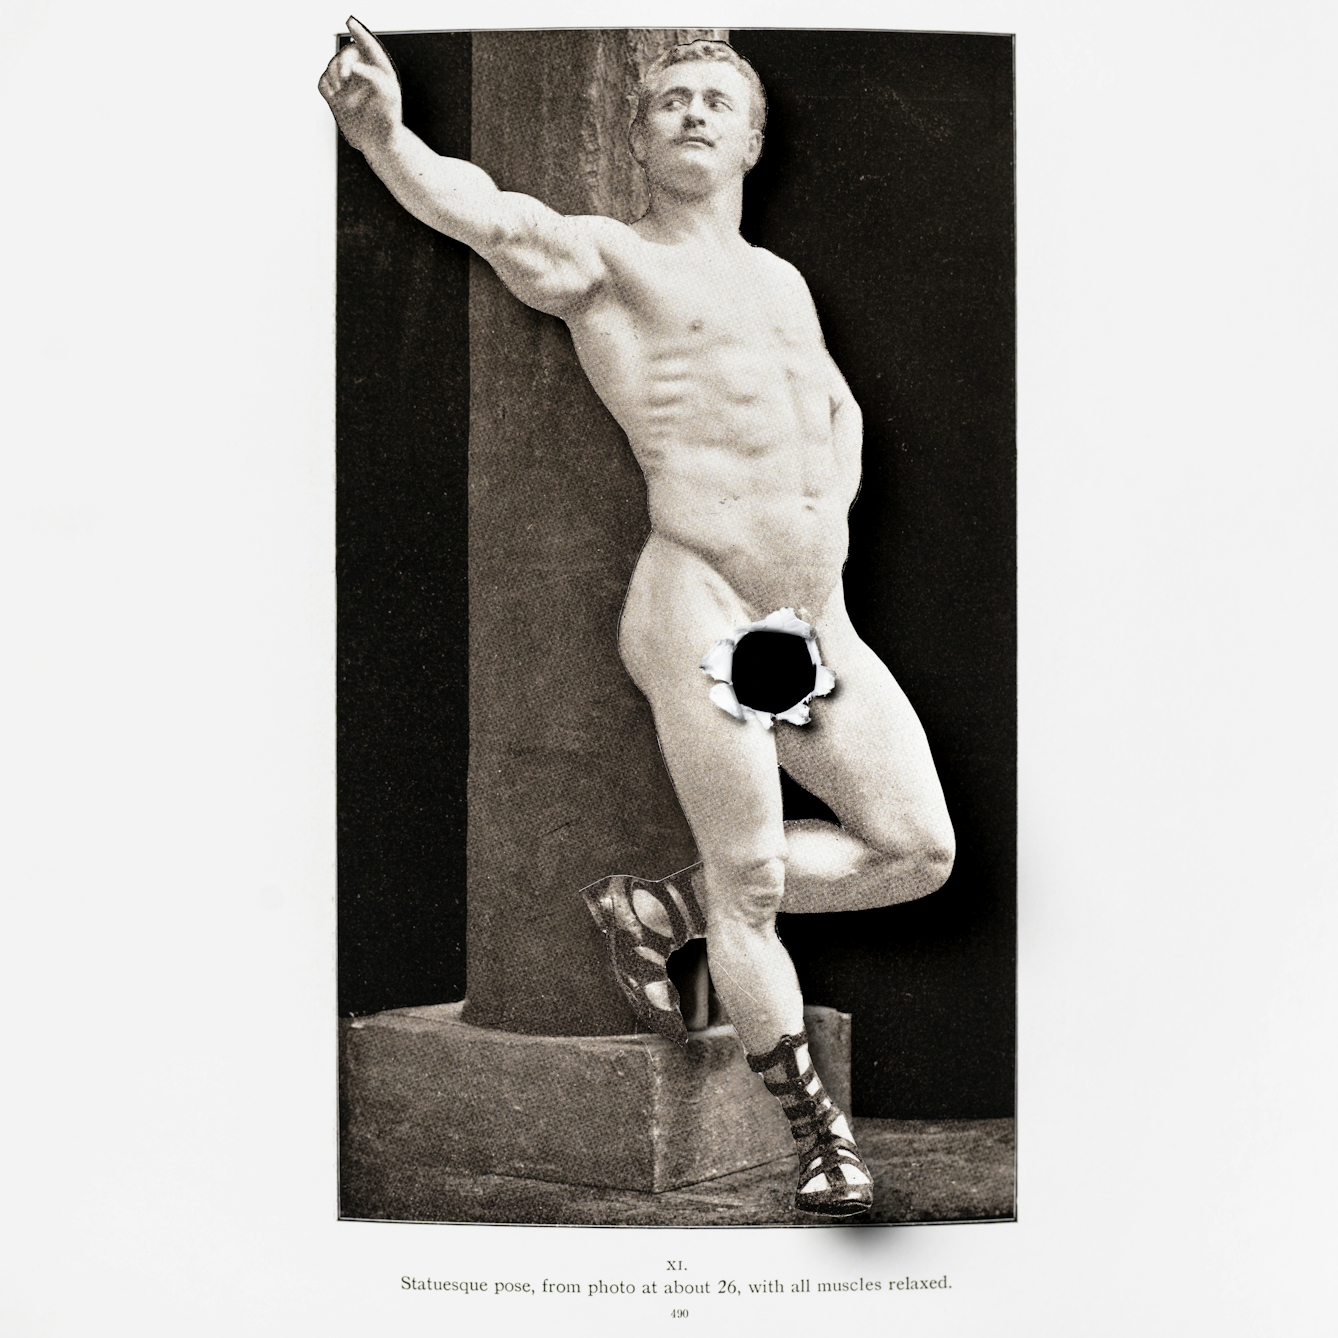 Photograph of a photograph of a naked man where the body of the man has been cut out and lifted above the background. Where the man's genitals should be there is a black hole with the torn edges folded forwards.